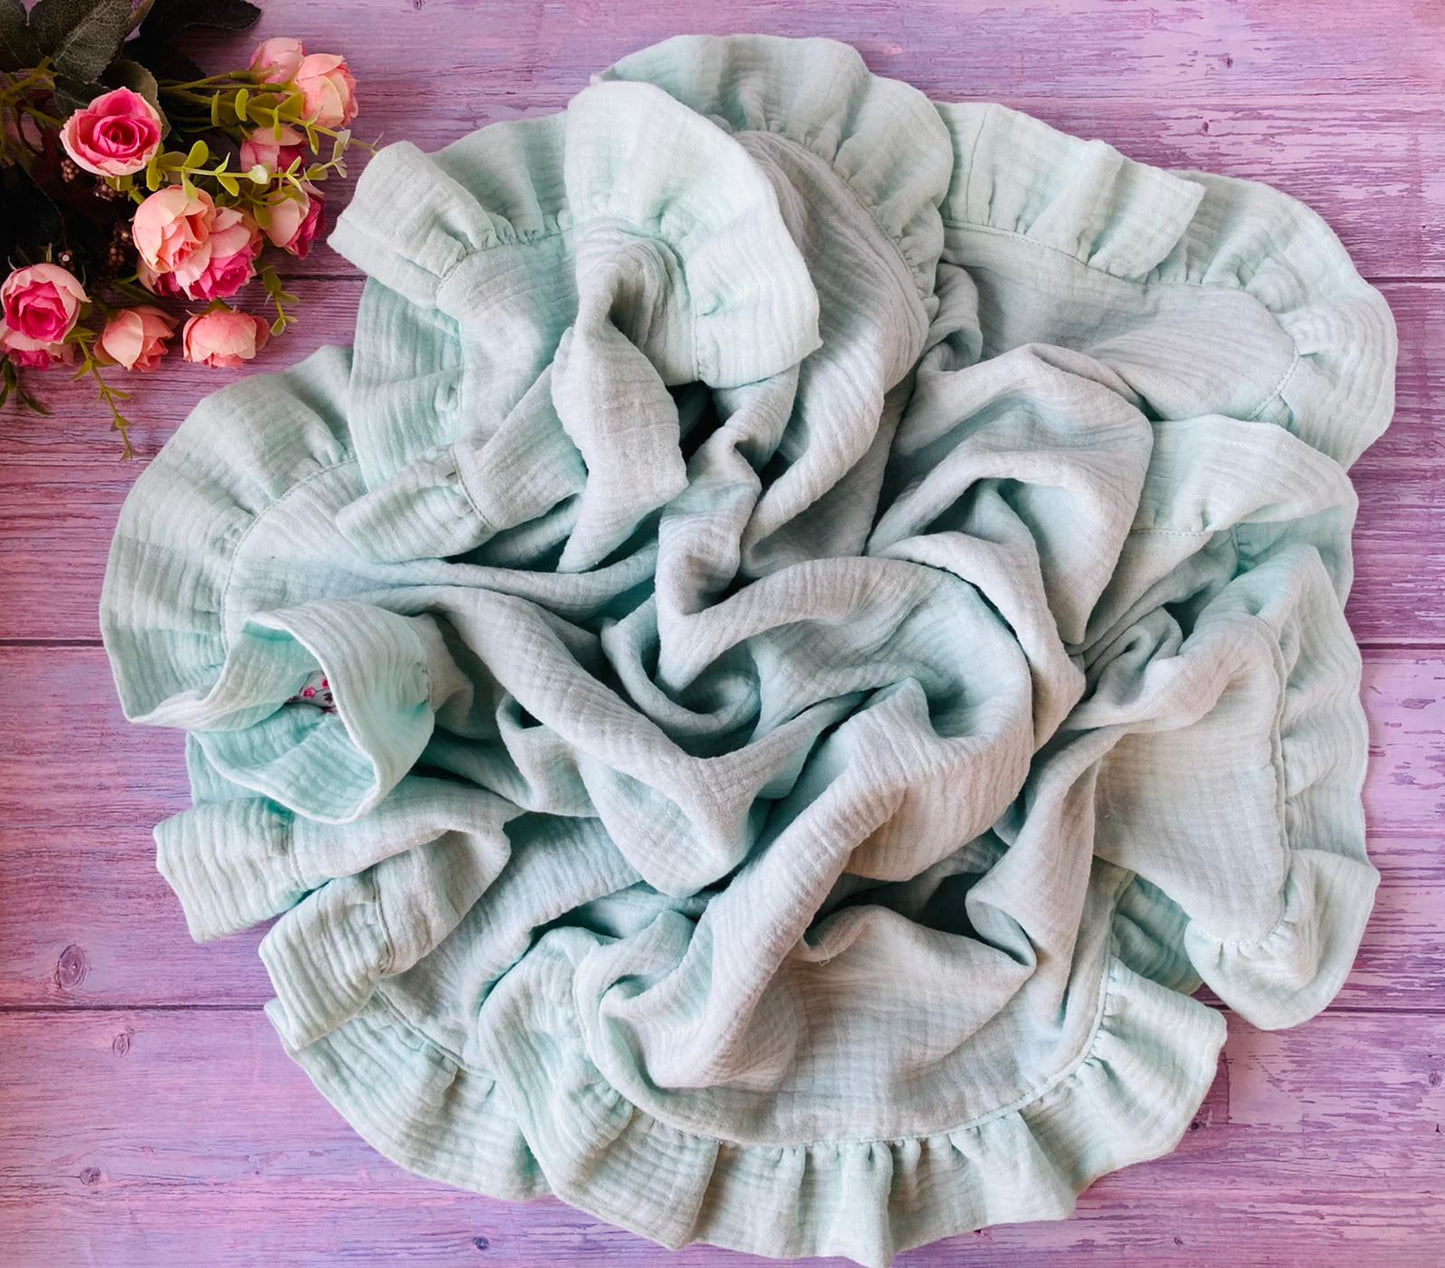 2 layer Cotton muslin ruffle blanket and Bunny comforter - perfect baby gift set, Mint flowers